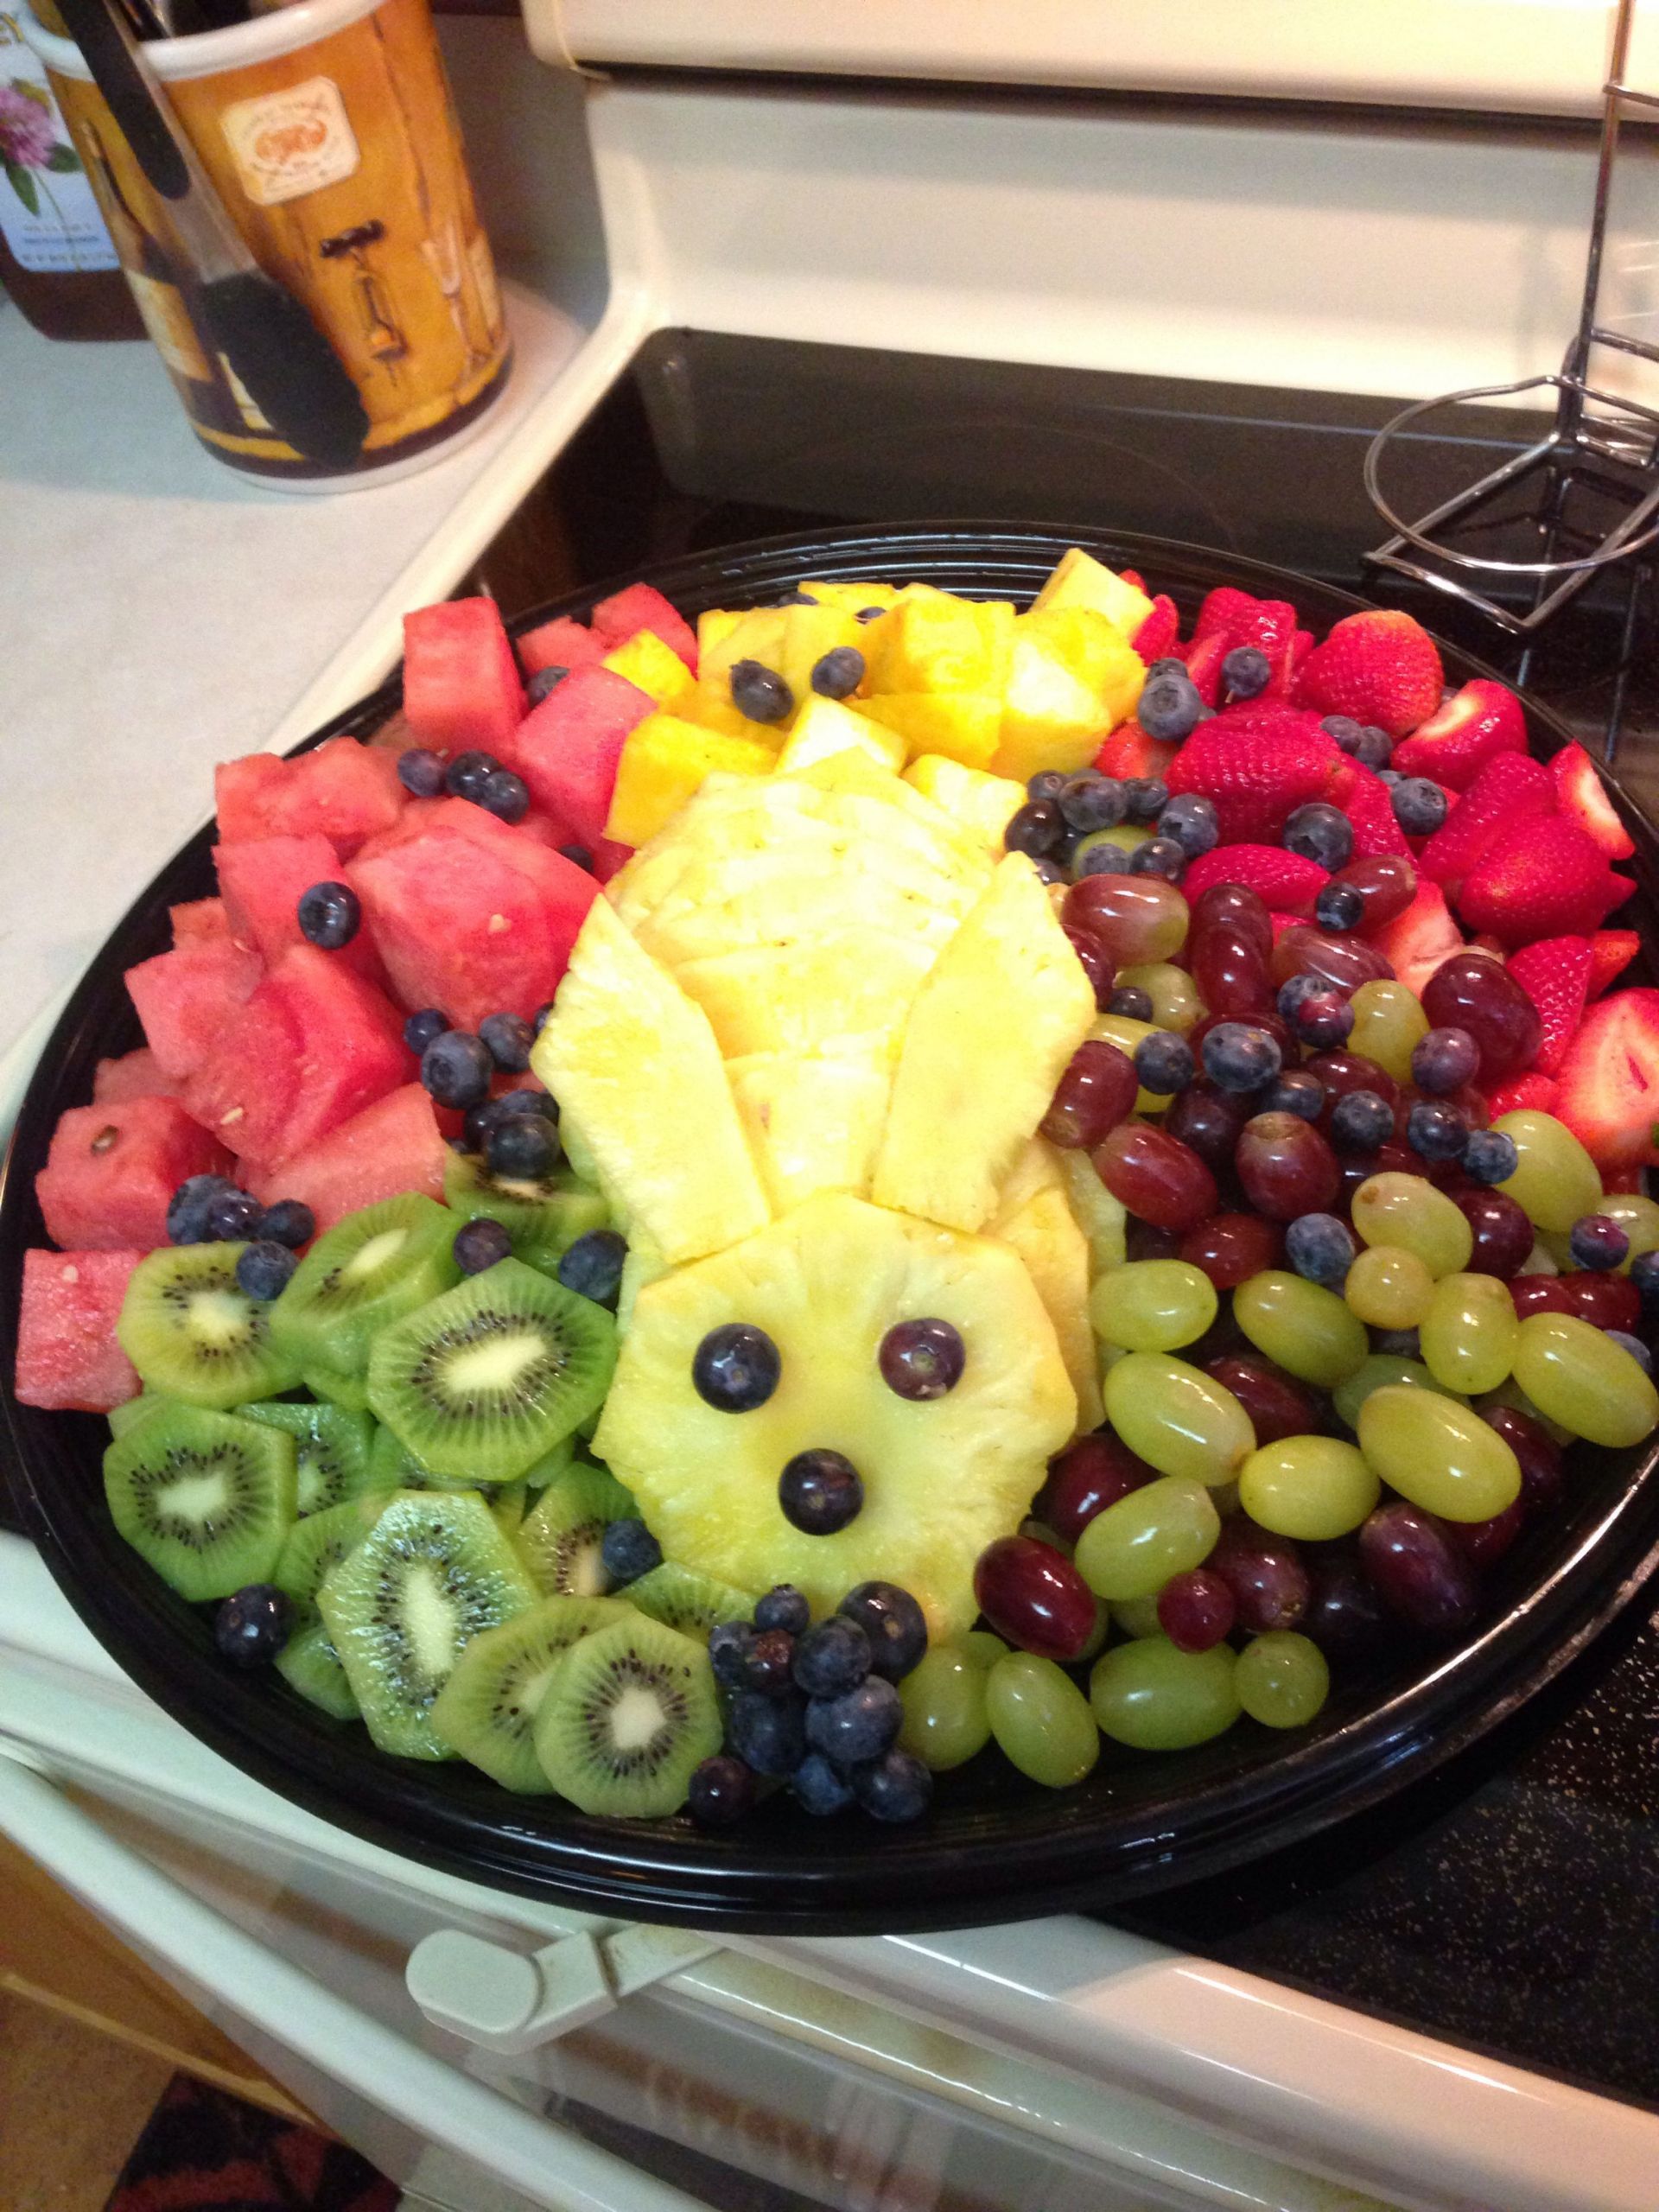 Easter Fruit Tray Ideas
 So I saw this on here and decided to try it for our